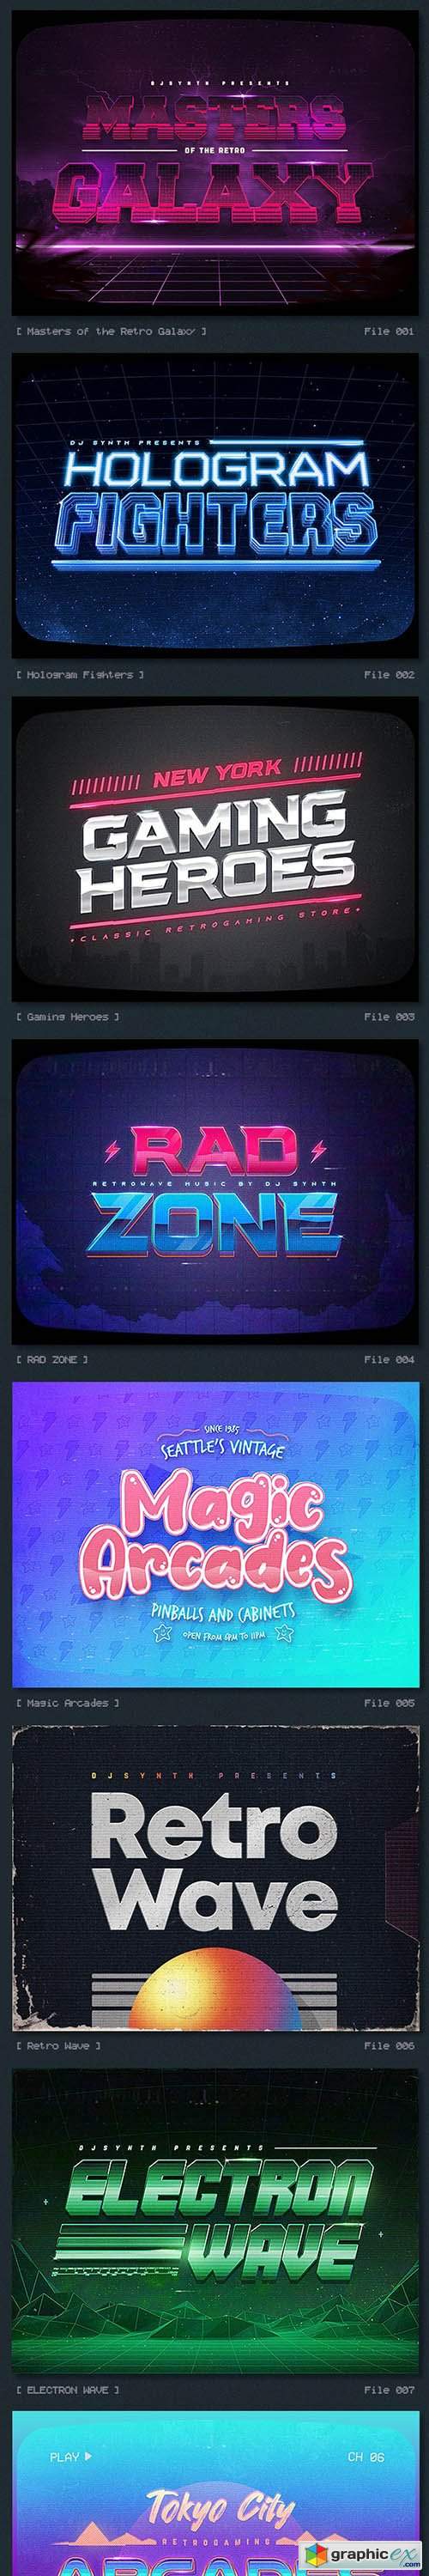 Synthwave 80s Retro Text Effects V3 